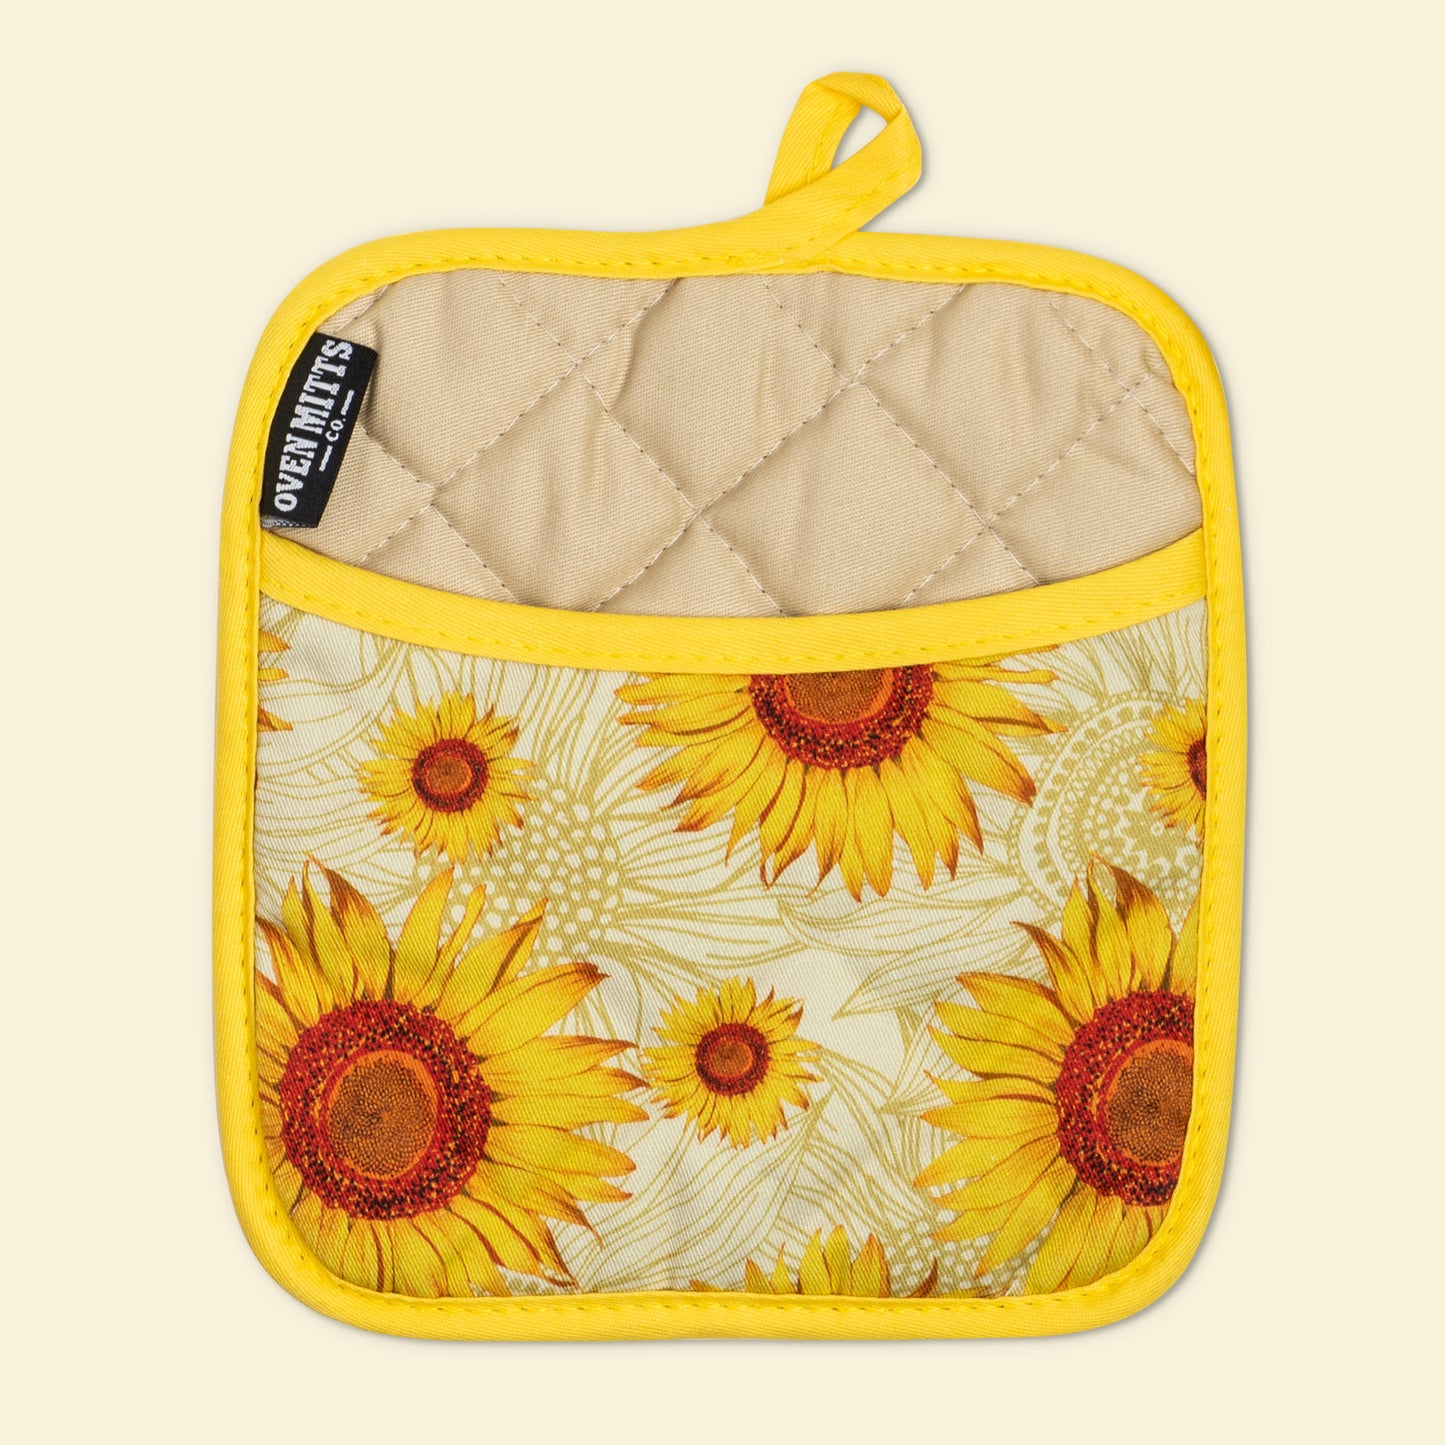 Summer Sunflowers Oven Mitts And Potholder Set